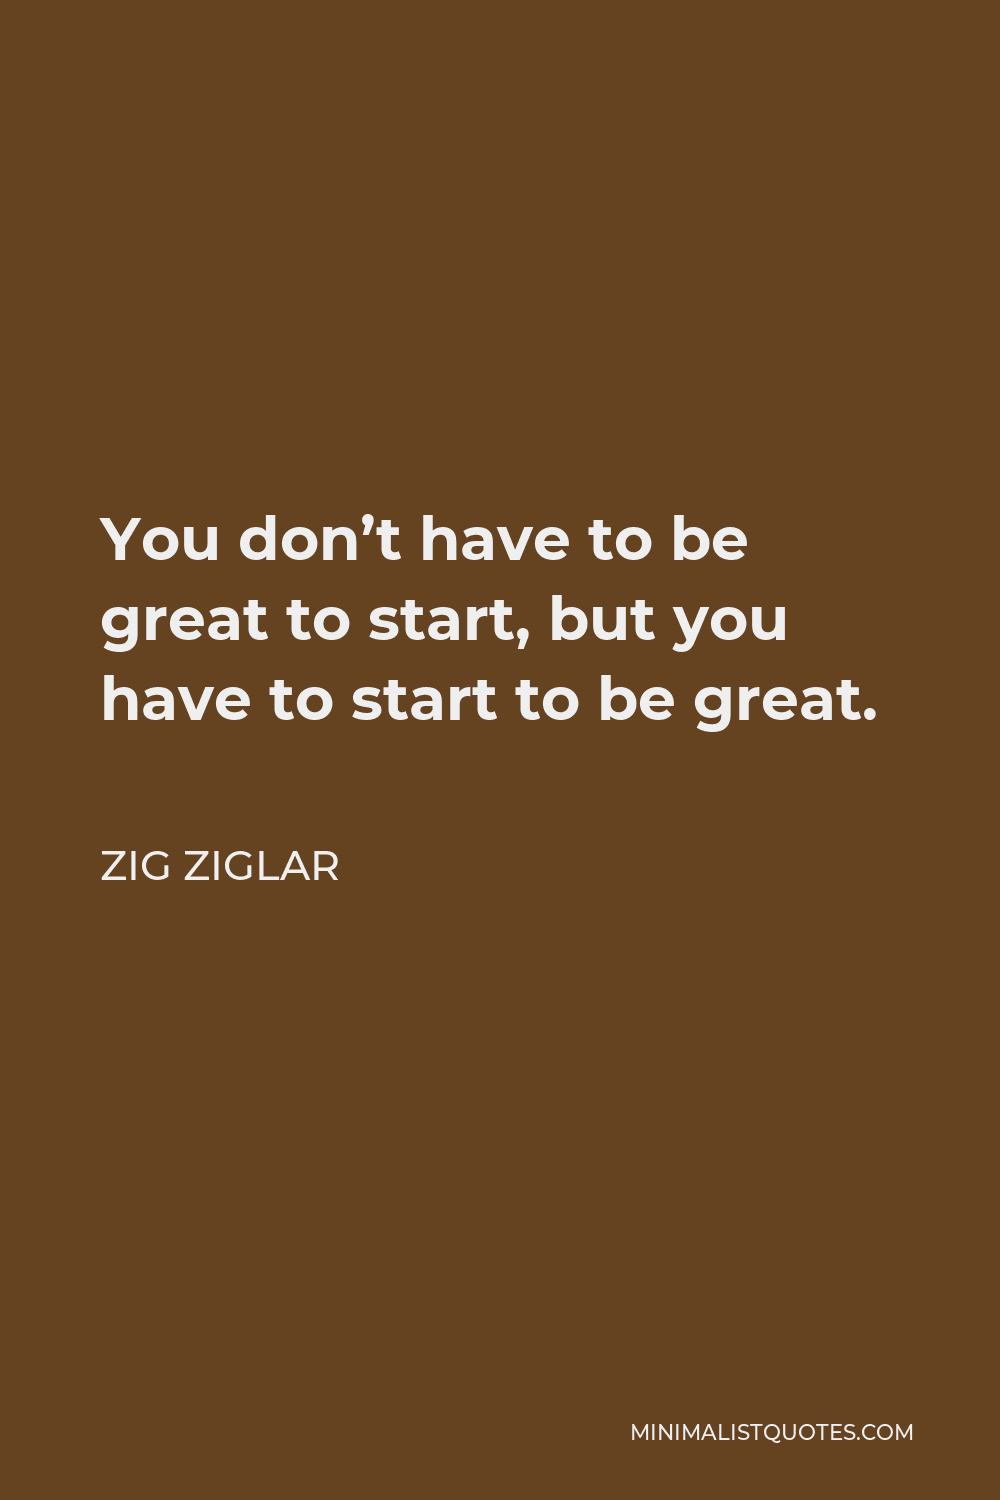 Zig Ziglar Quote - You don’t have to be great to start, but you have to start to be great.